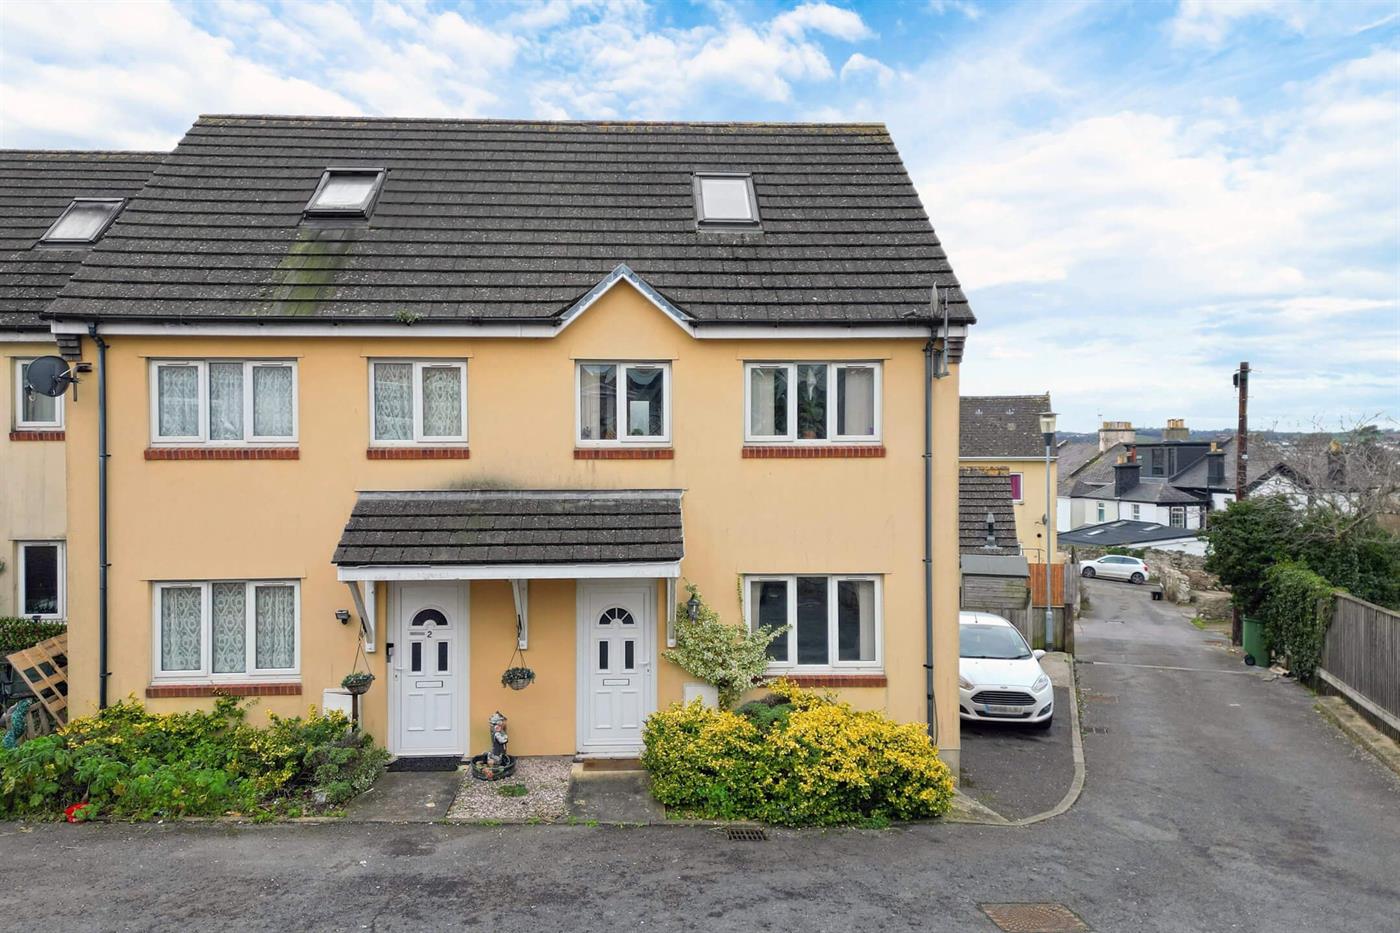 3 Bedroom End of Terrace House for Sale: Dunmere Court, Dunmere Rd, Torquay, TQ1 1LR